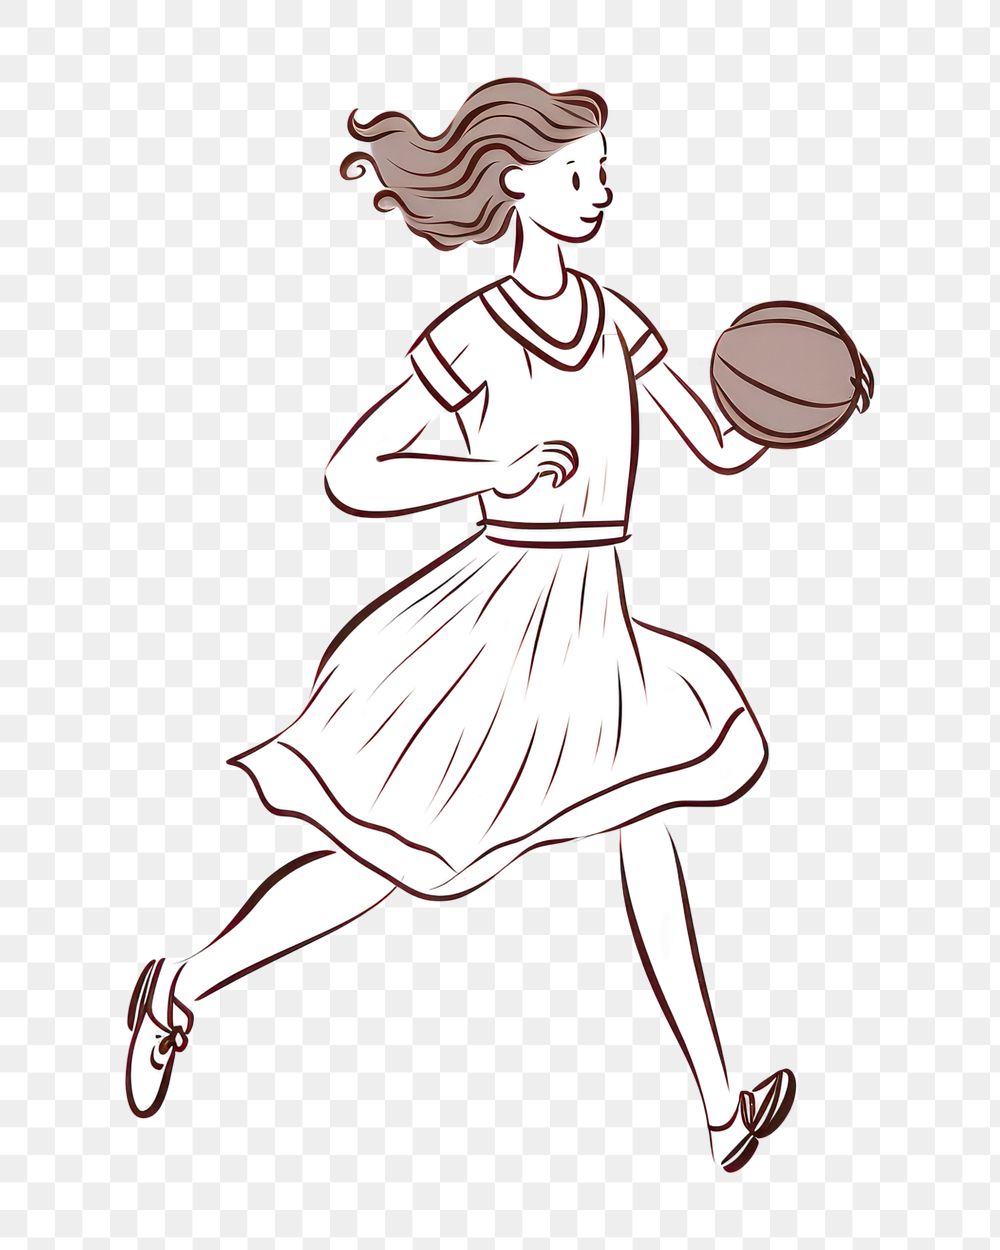 PNG Hand-drawn illustration woman basketball player running drawing sports sketch.